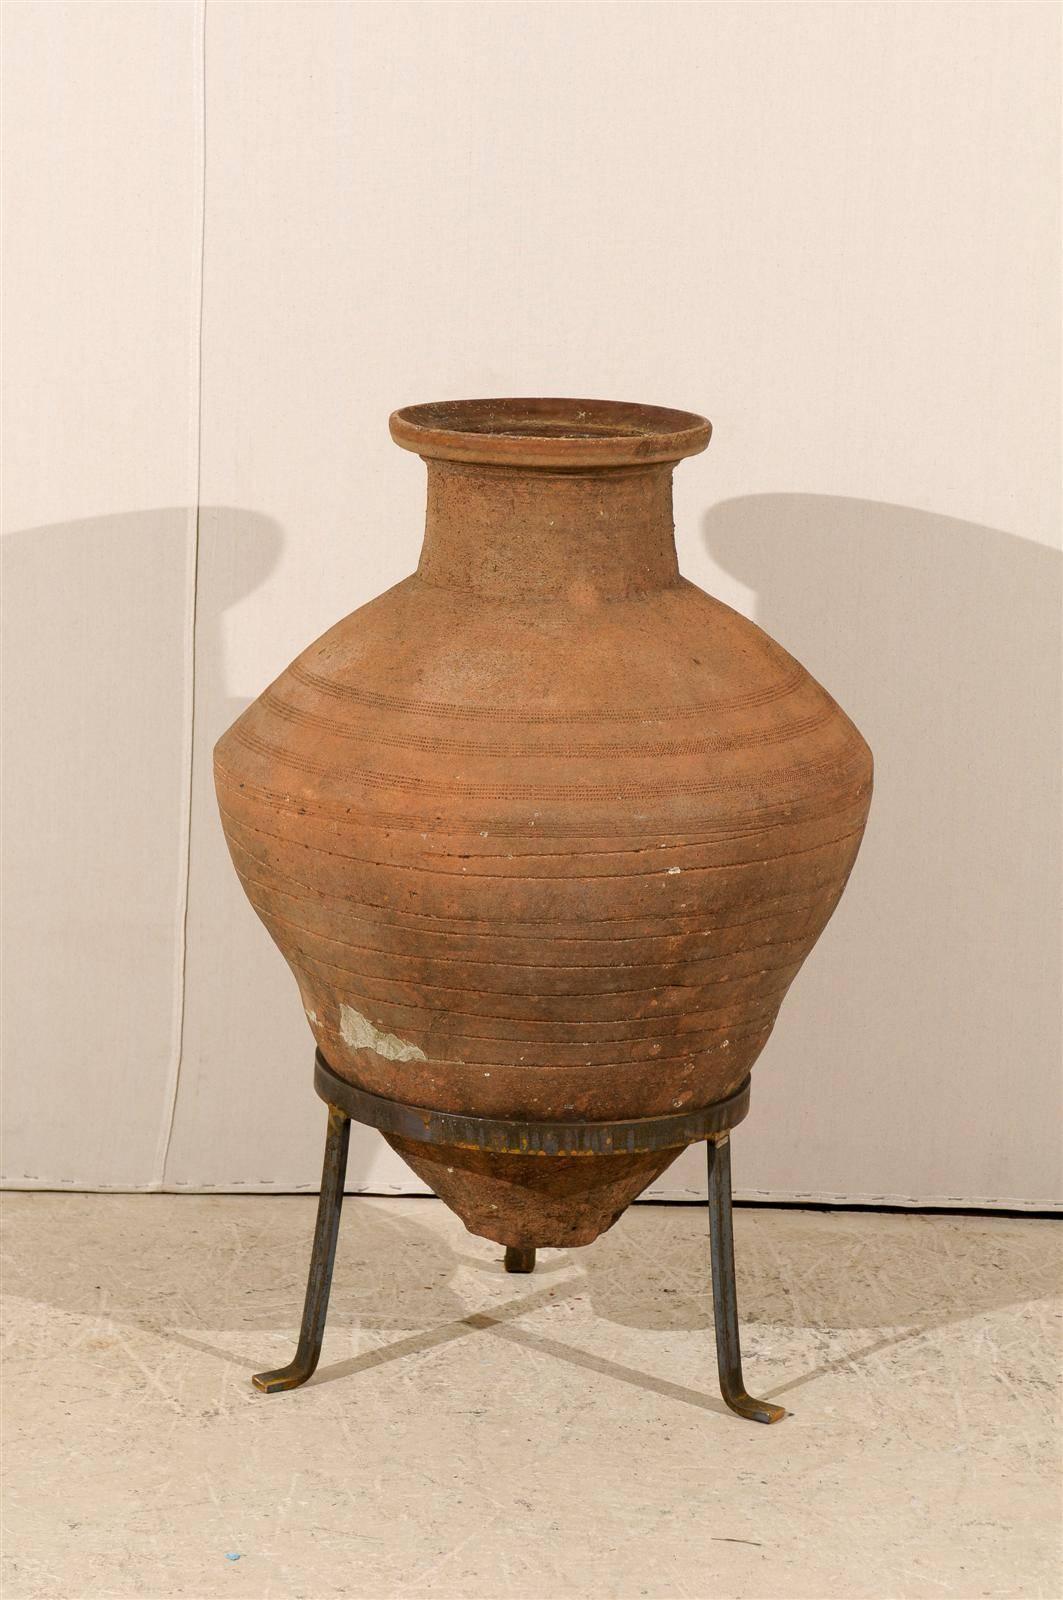 A European olive jar from the mid-19th century. This terracotta olive jar features a beautiful coloration and shape. The jar is raised on a custom-made metal tripod base. The dimensions mentioned below are with the stand.